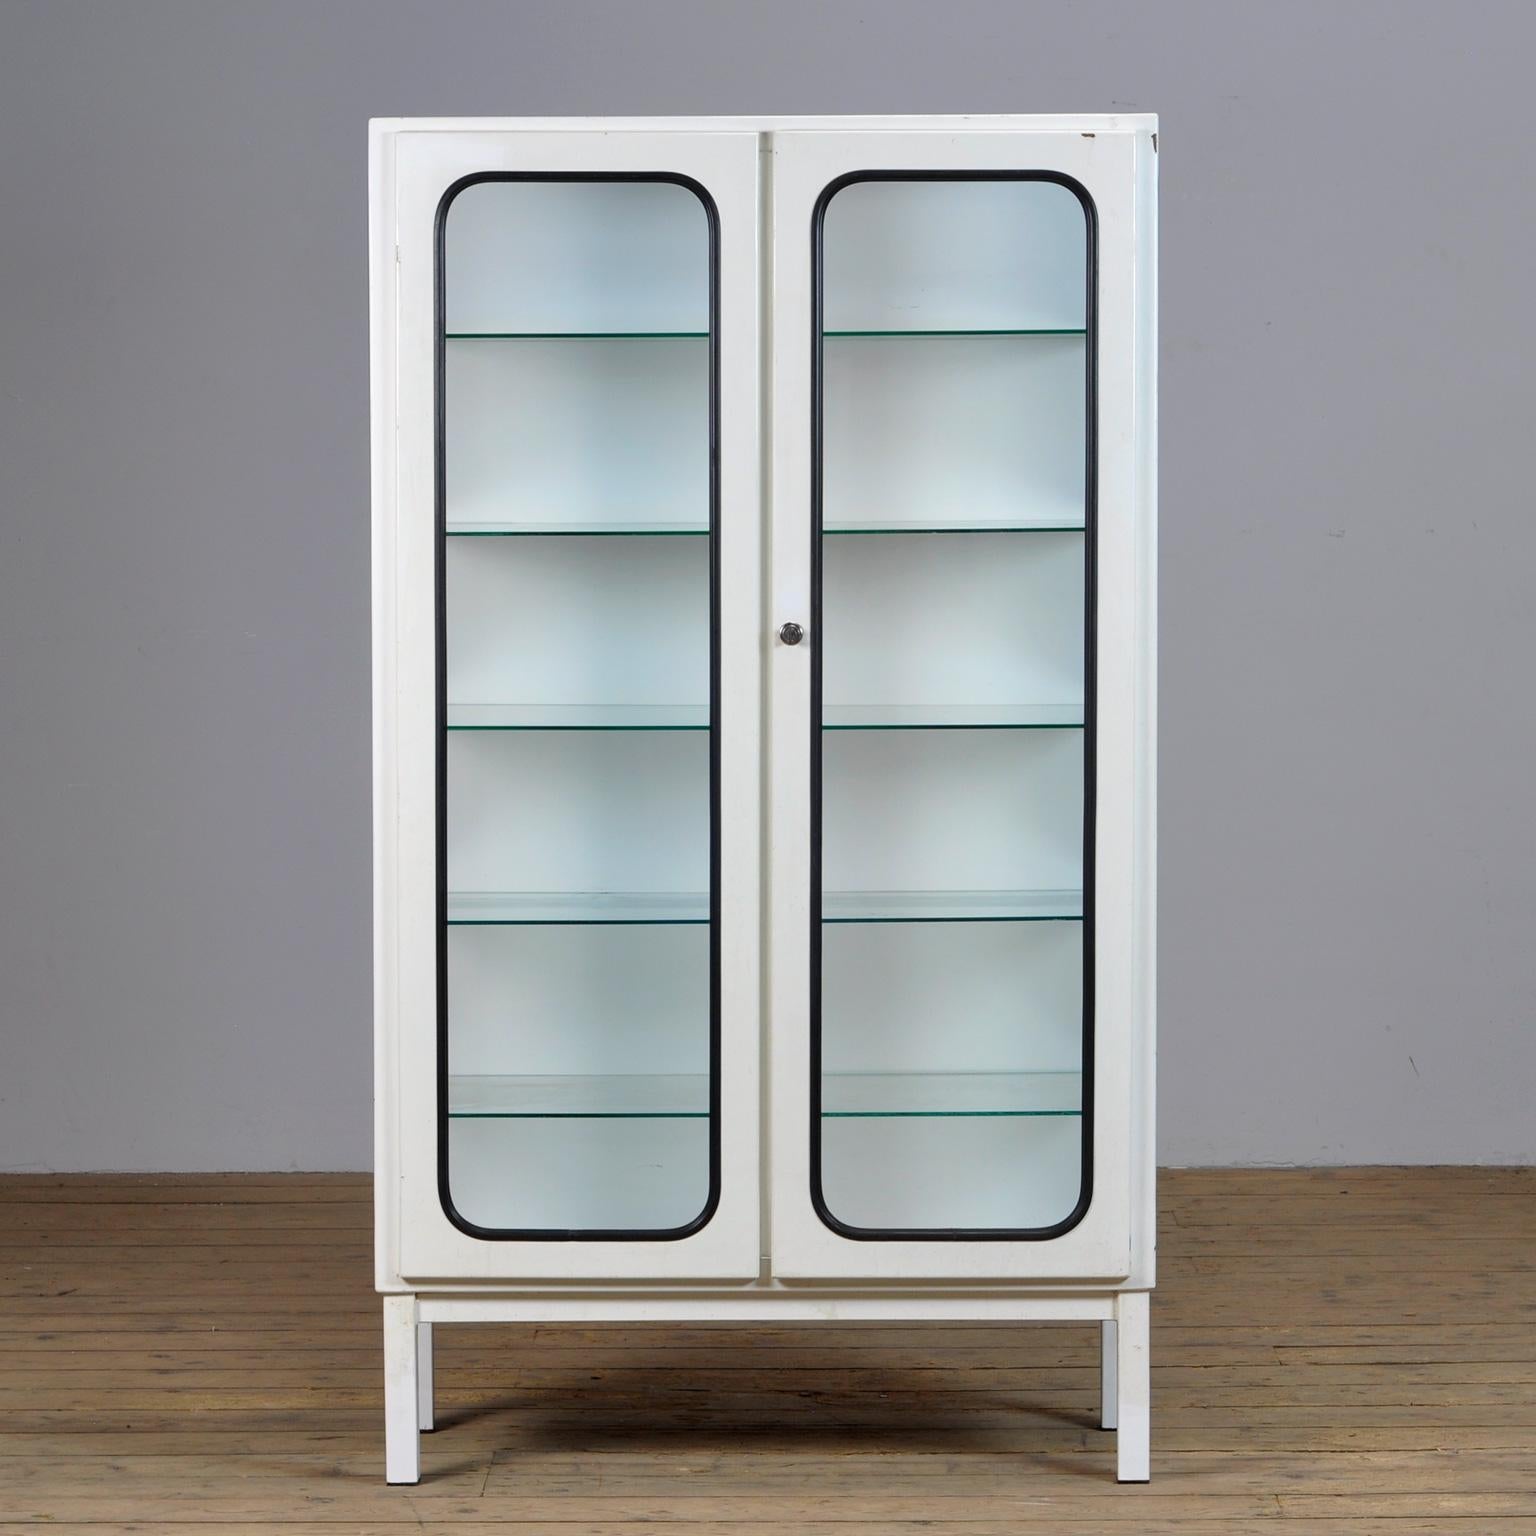 This medicine cabinet was designed in the 1970s and was produced circa 1975 in hungary. It is made from iron and glass, and the glass is held by a black rubber strip. The cabinet features five adjustable glass shelves and a functioning lock.